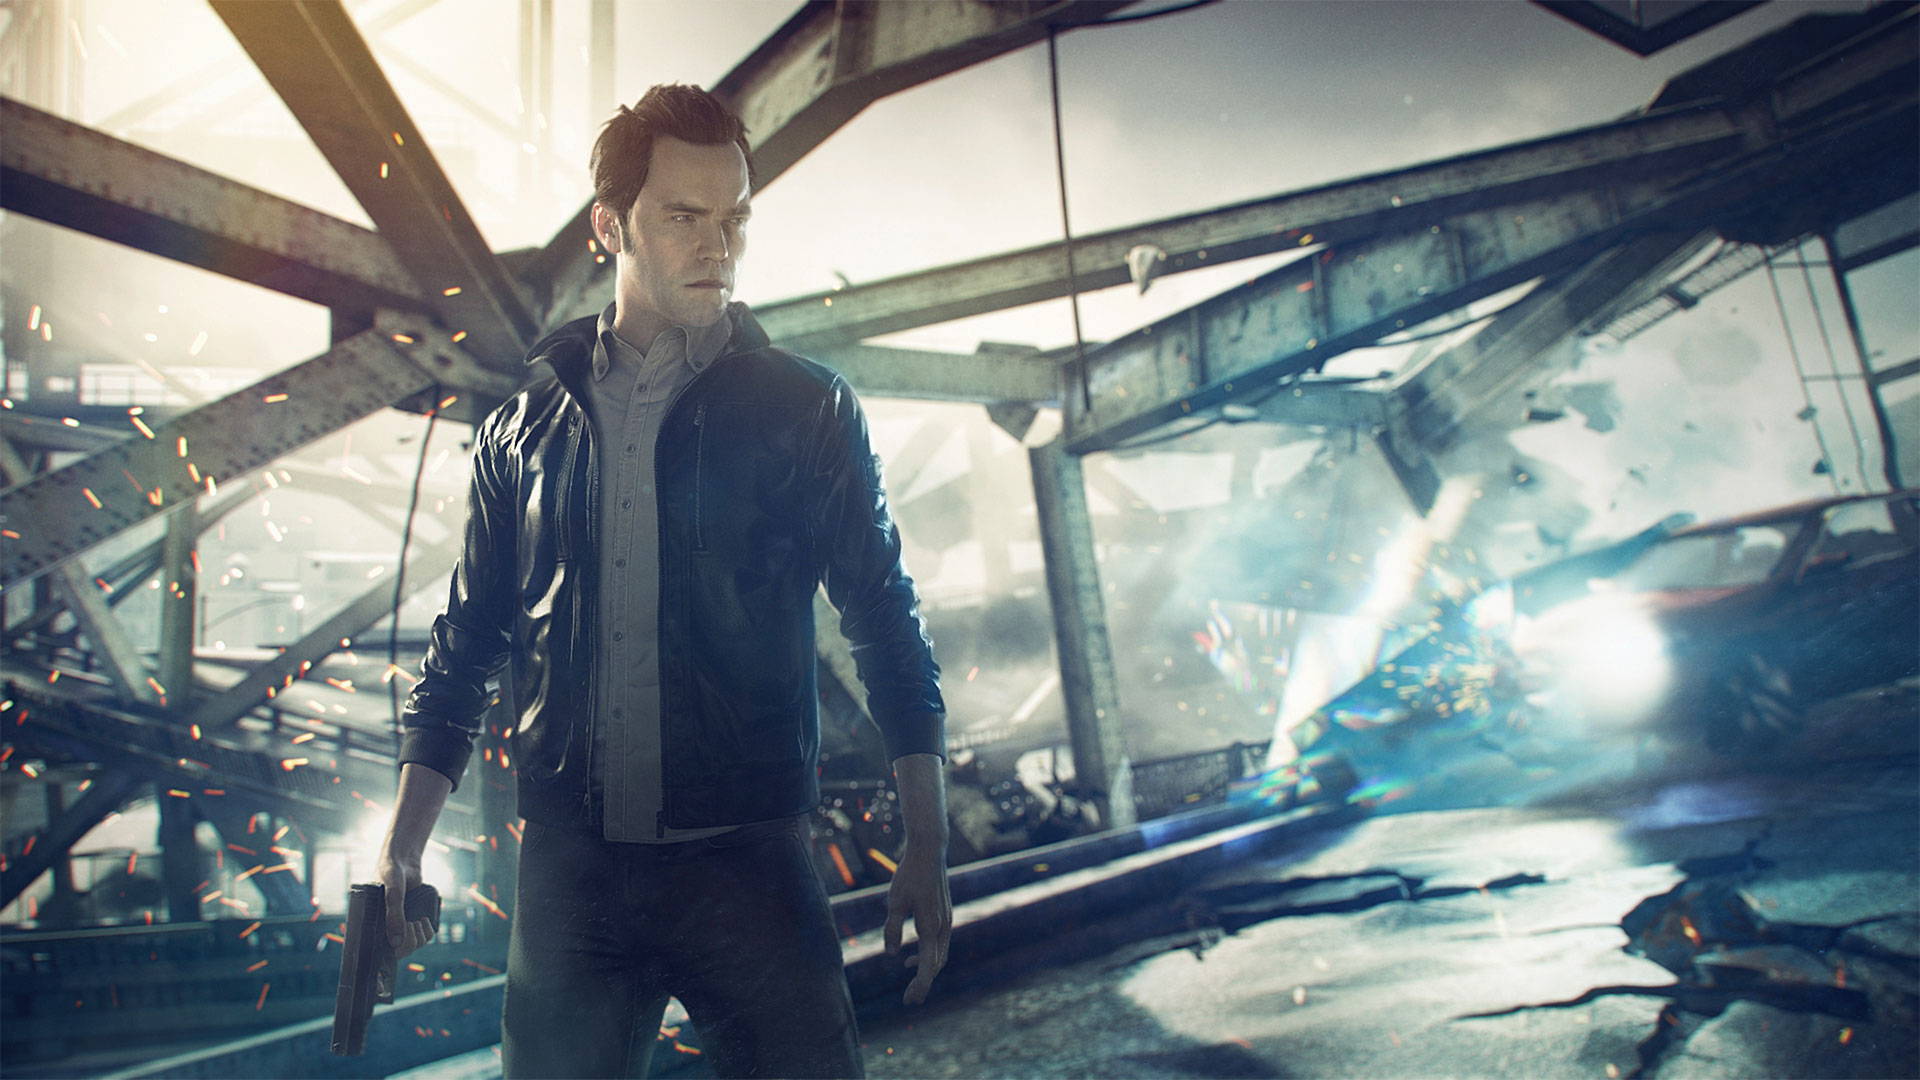 HD wallpaper of Jack Joyce from Quantum Break with a chaotic time-distorted background.